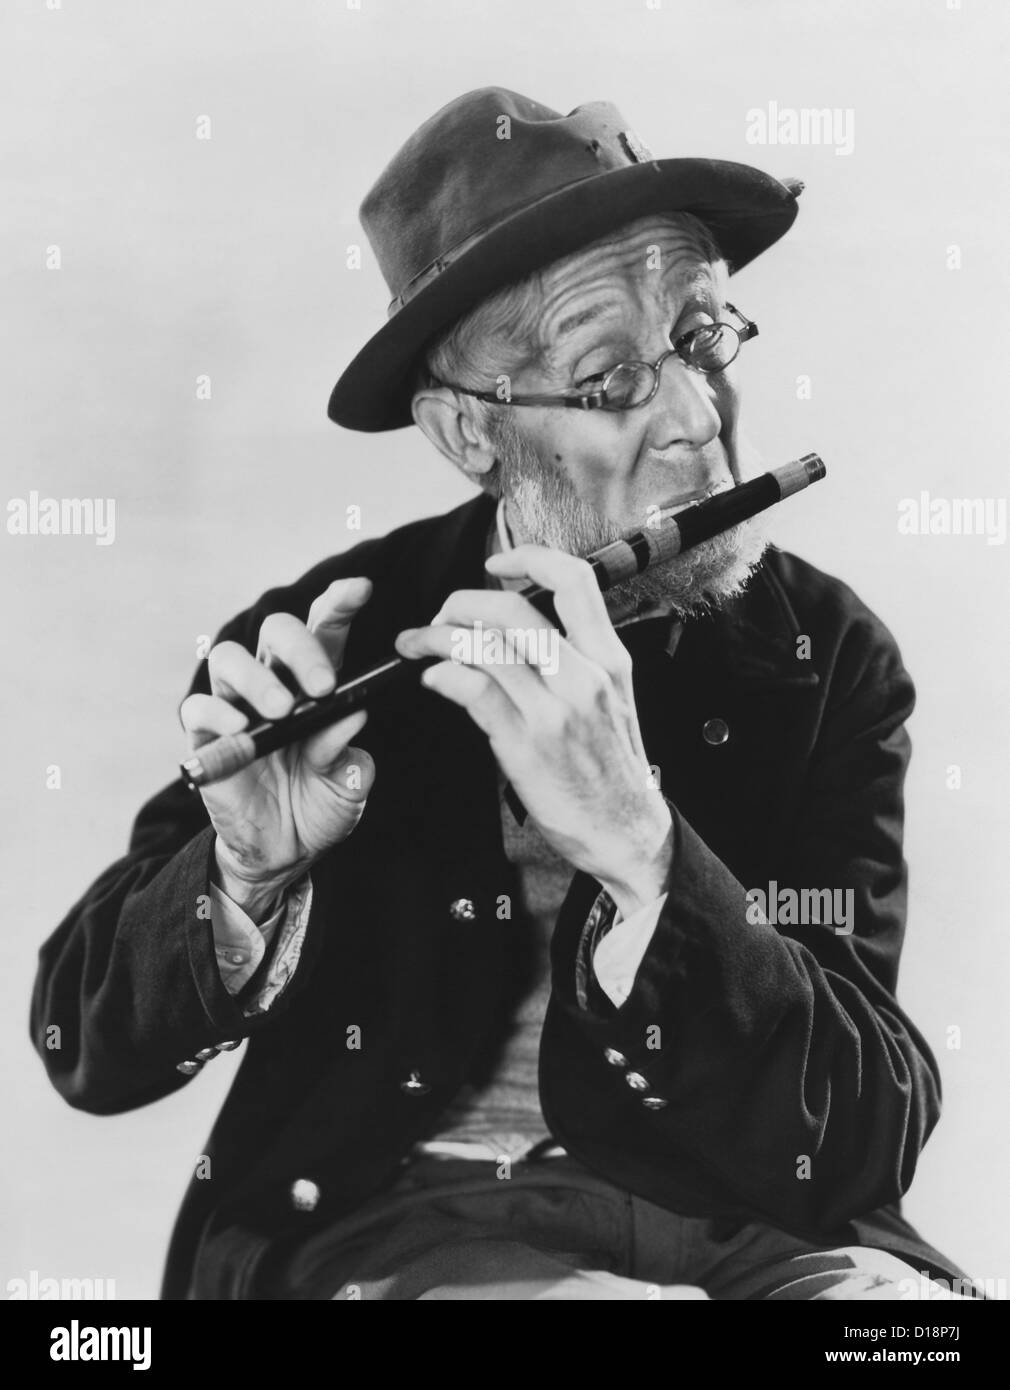 Pied piper Black and White Stock Photos & Images - Alamy